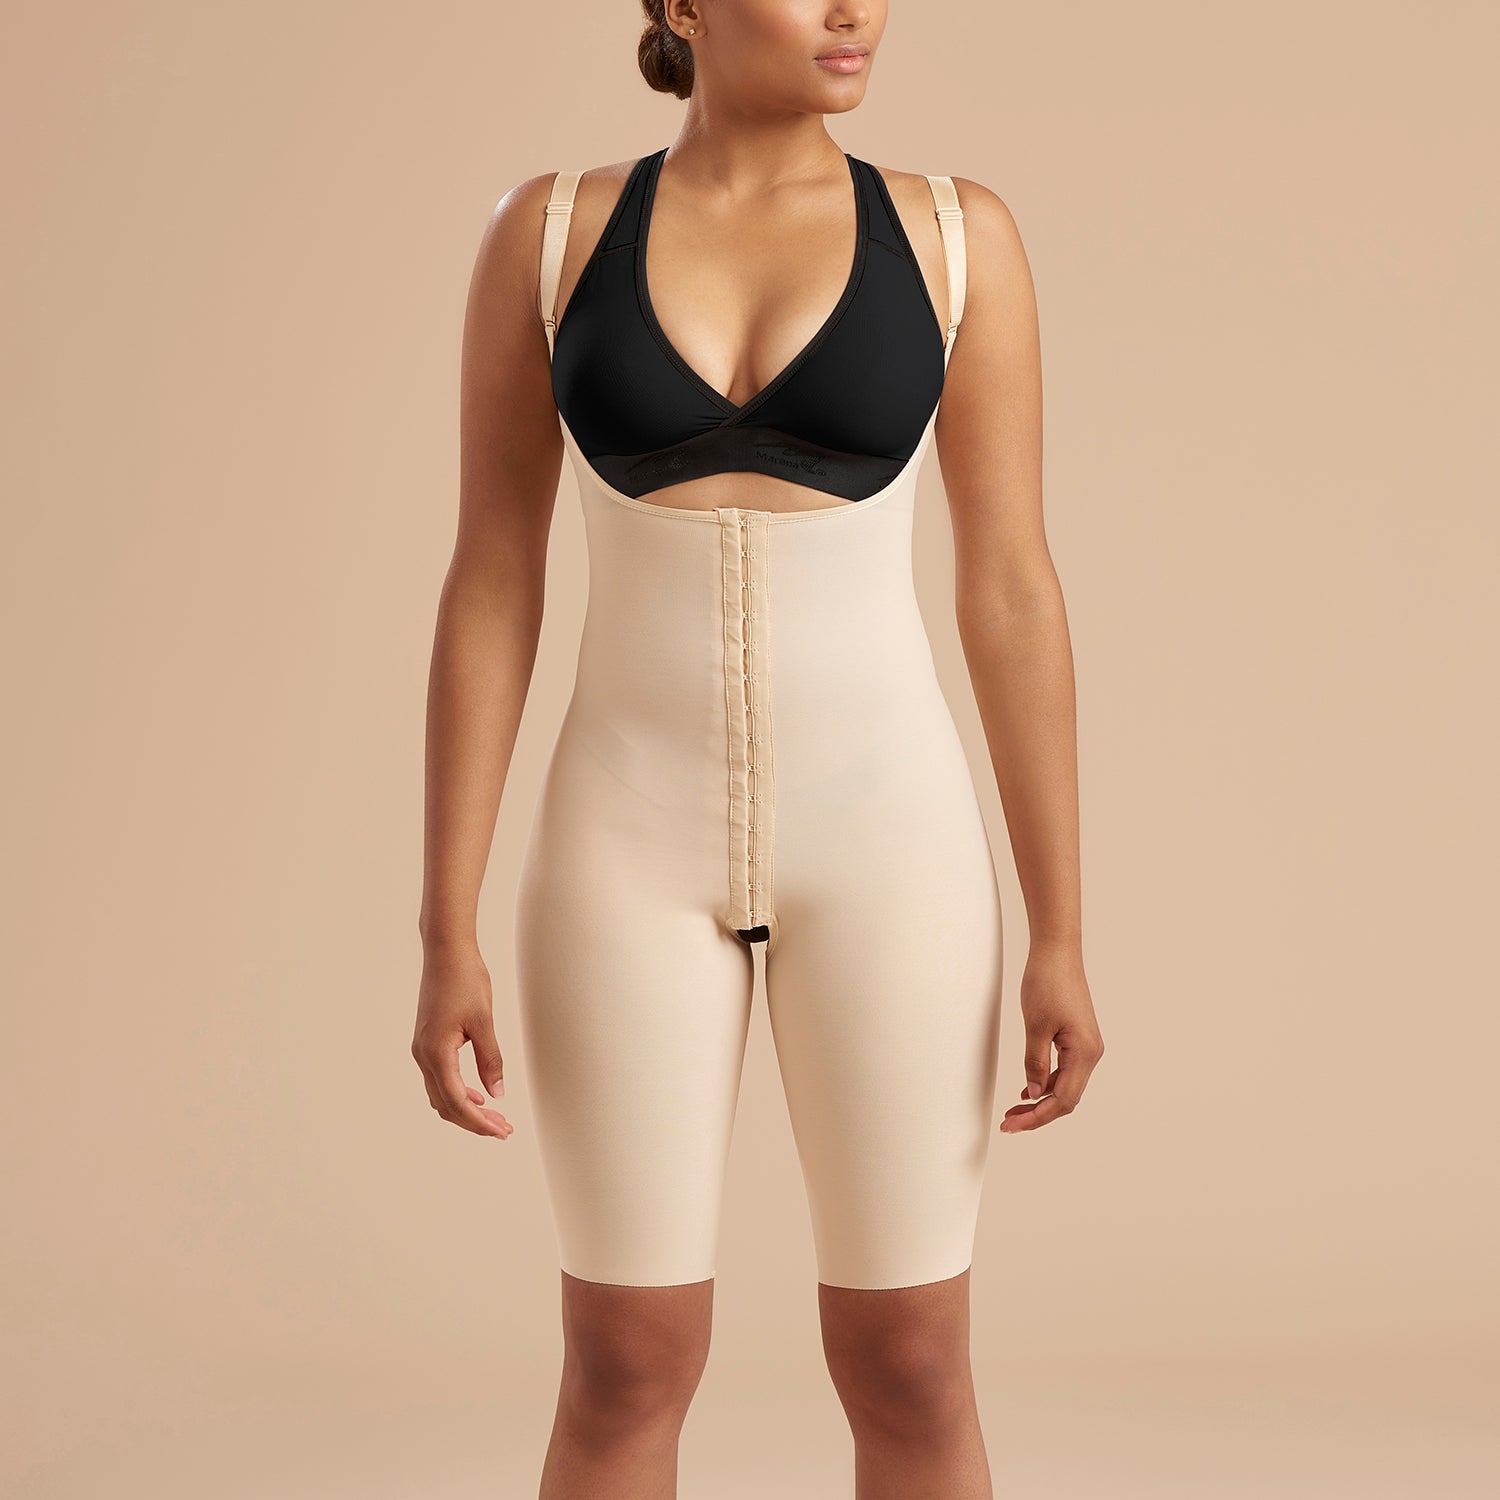 Shapewear for Women Full Body Shaper with Bra Shapewear Post Surgery  Compression Garment Butt Lifting (Color : Beige, Size : Small) at   Women's Clothing store